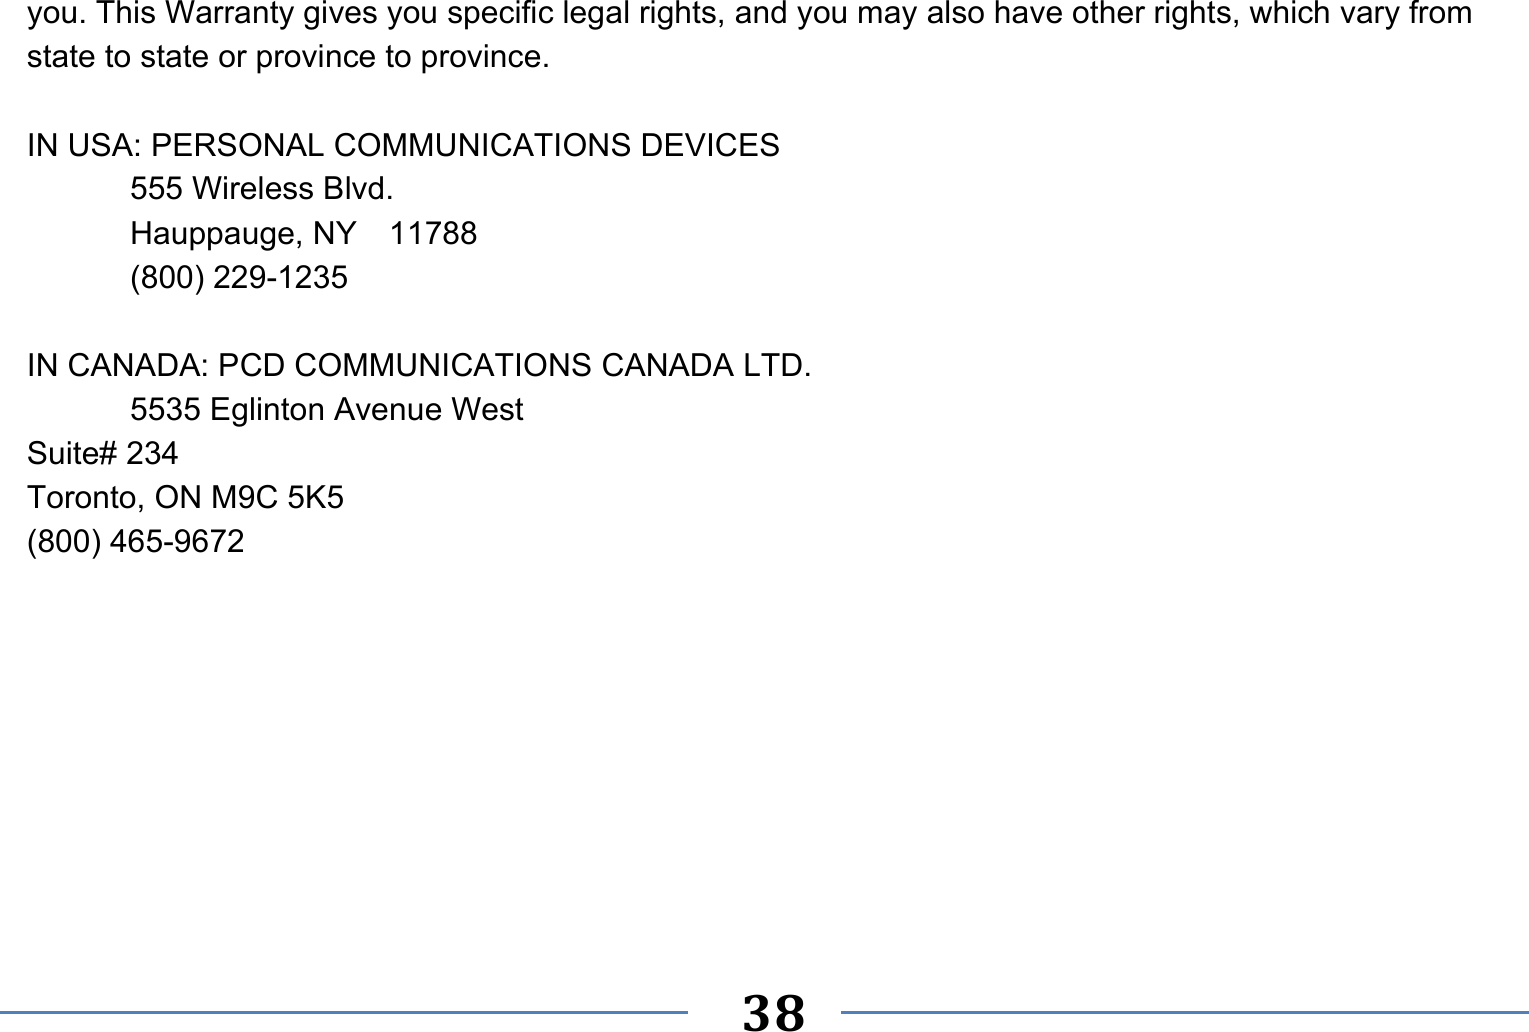   38   you. This Warranty gives you specific legal rights, and you may also have other rights, which vary from state to state or province to province.  IN USA: PERSONAL COMMUNICATIONS DEVICES   555 Wireless Blvd.   Hauppauge, NY  11788  (800) 229-1235  IN CANADA: PCD COMMUNICATIONS CANADA LTD.   5535 Eglinton Avenue West Suite# 234 Toronto, ON M9C 5K5 (800) 465-9672     